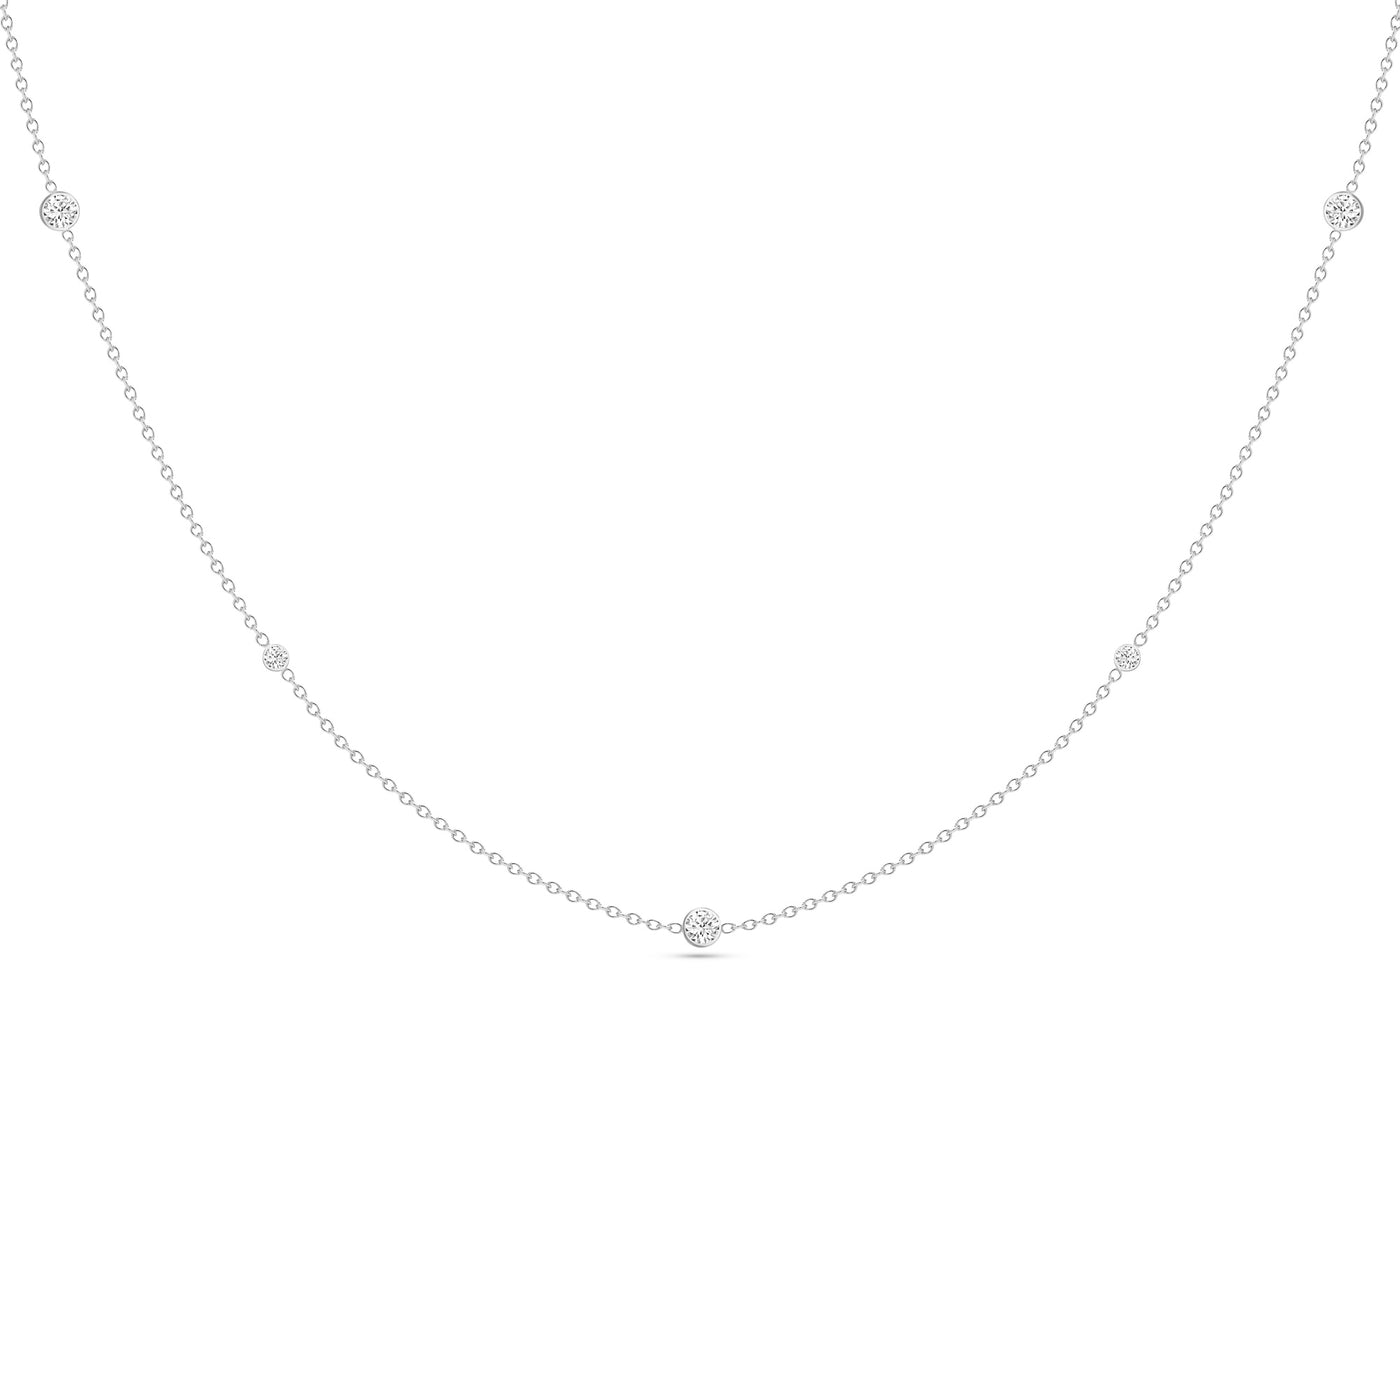 14K Solid White Gold Alternating Size Diamond By Yard Necklace